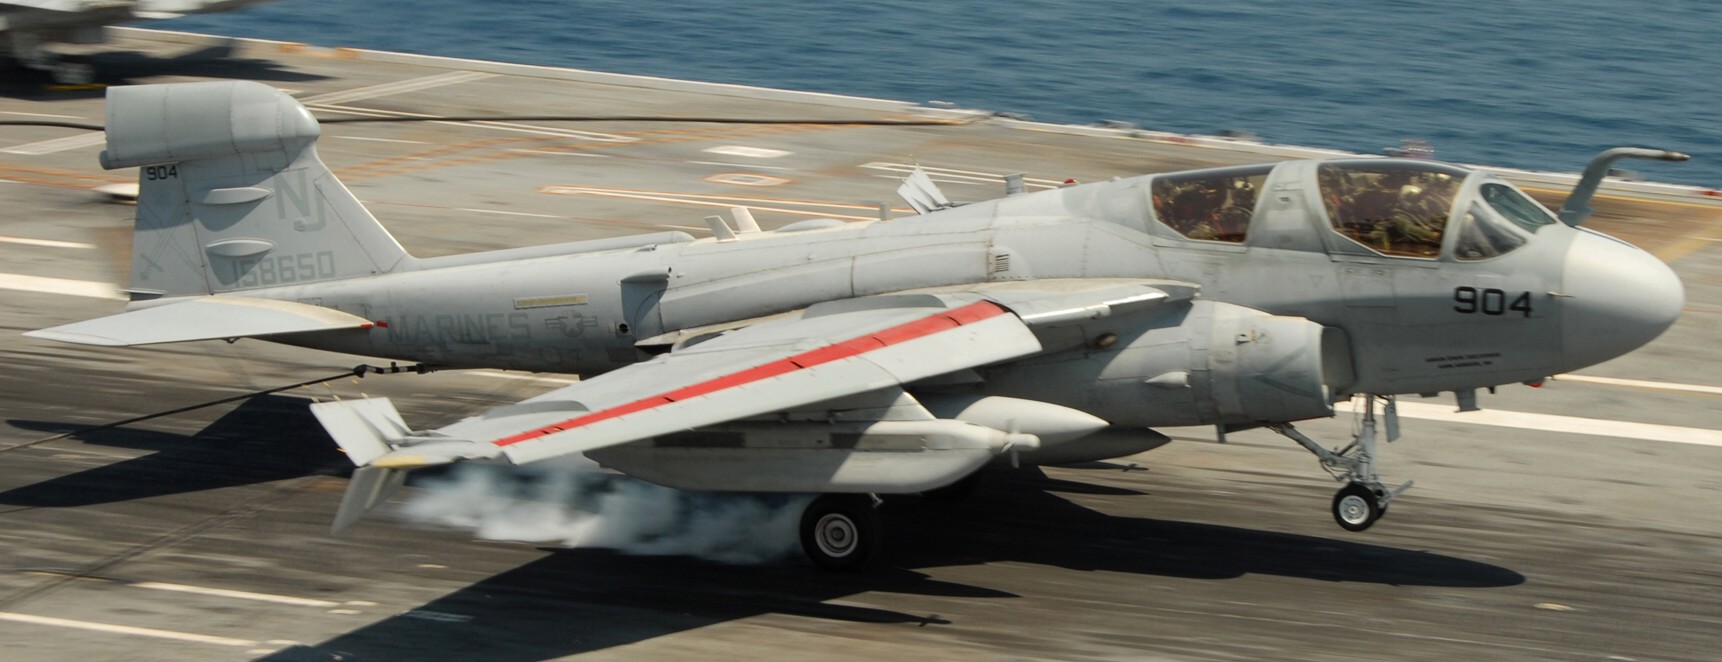 vaq-129 vikings electronic attack squadron fleet replacement frs us navy ea-6b prowler 35